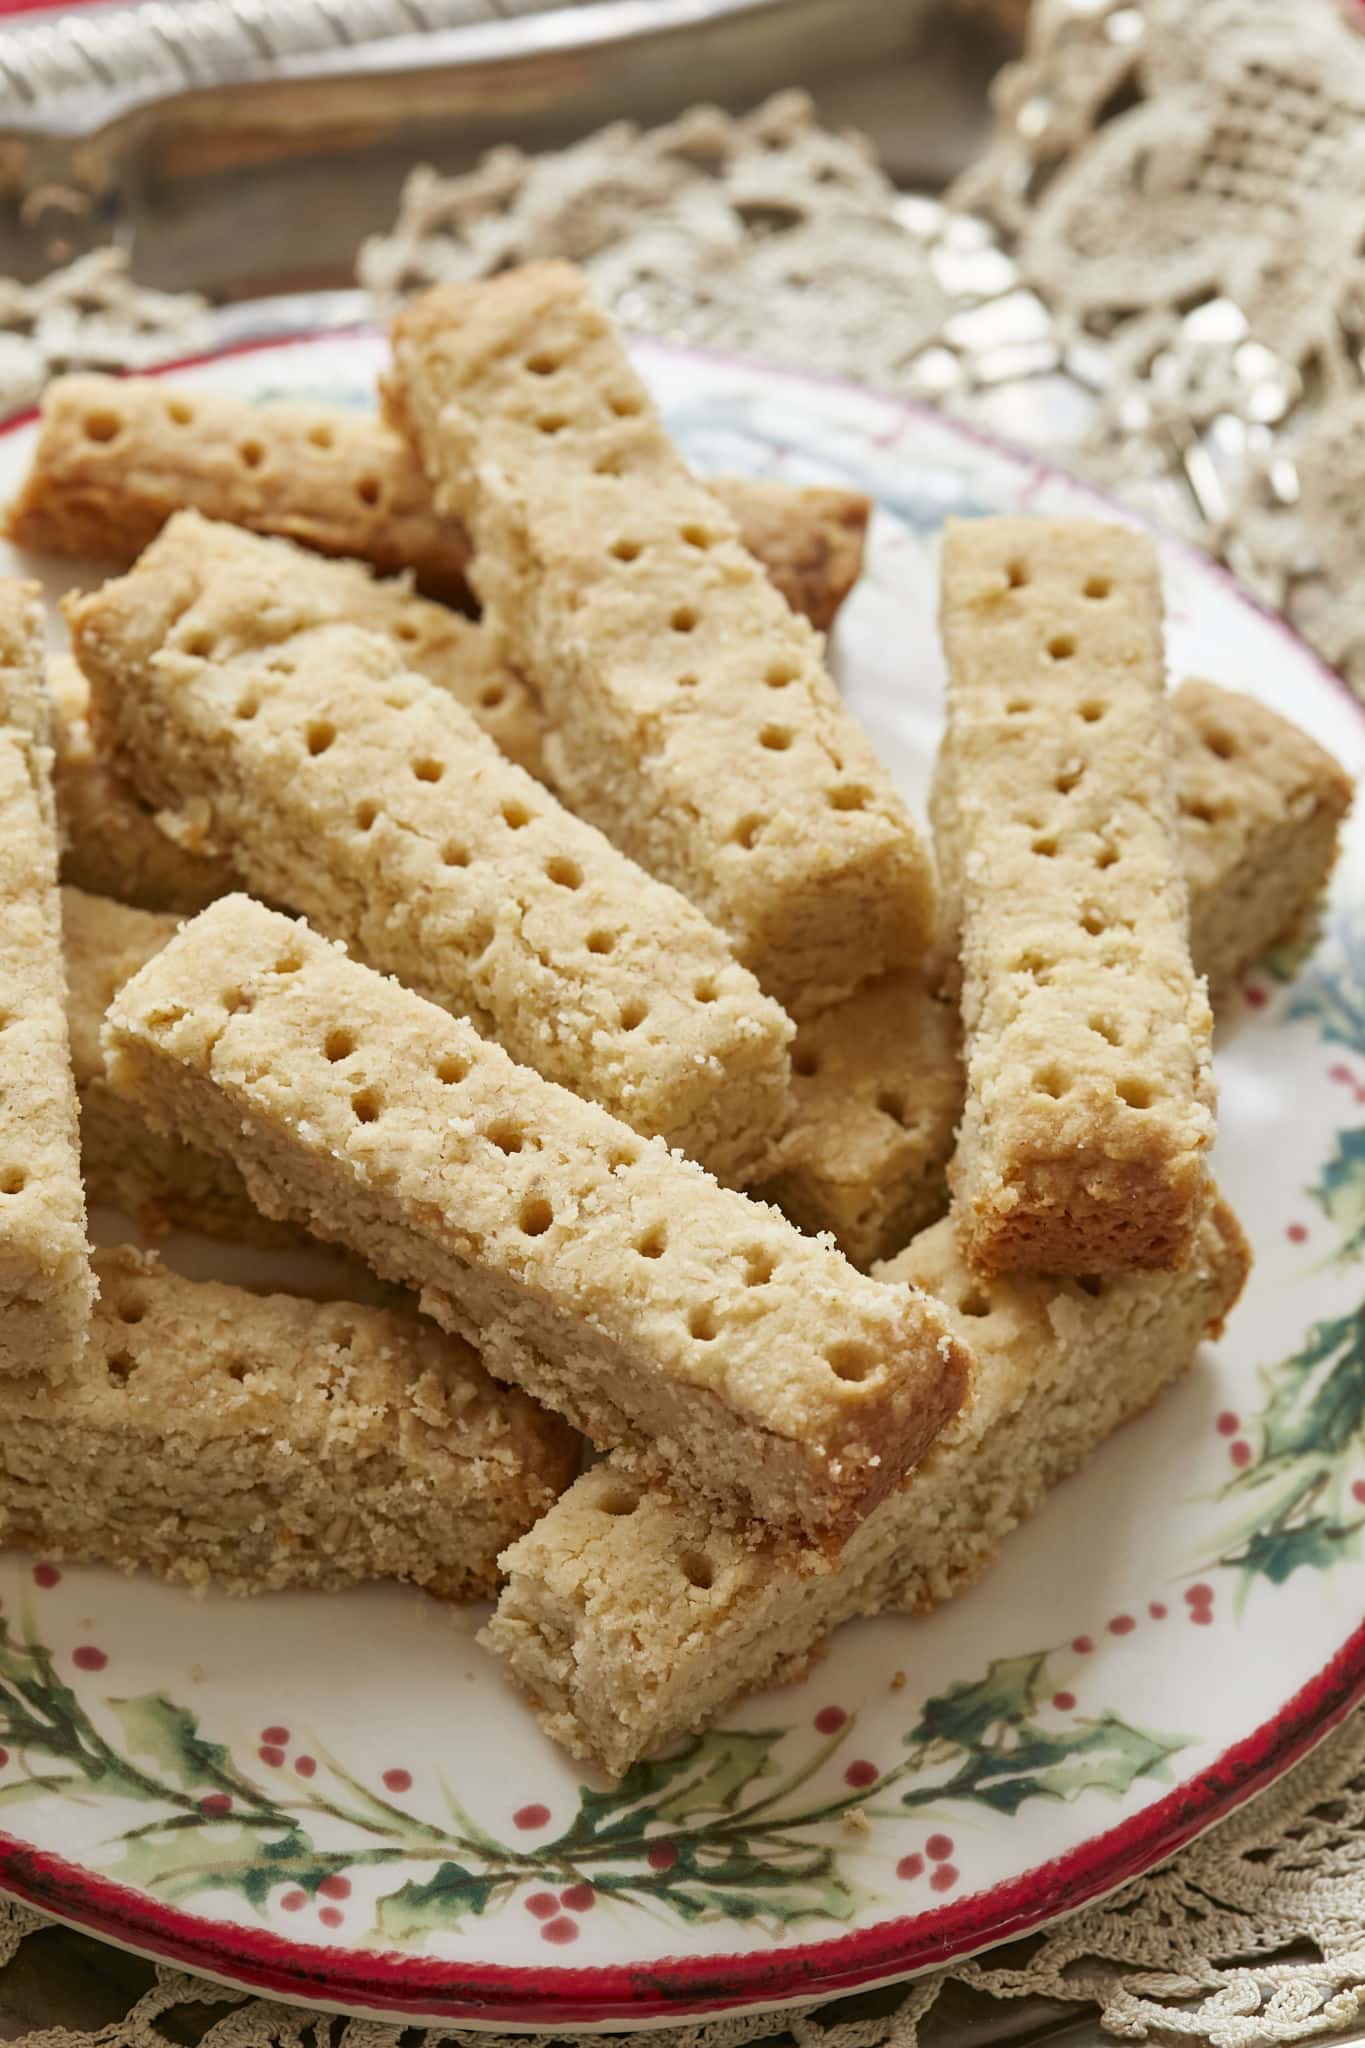 A close-up image of the homemade Scottish Shortbread Cookies show a flakey texture and the skewer marks poked throughout to allow steam to escape while baking. 